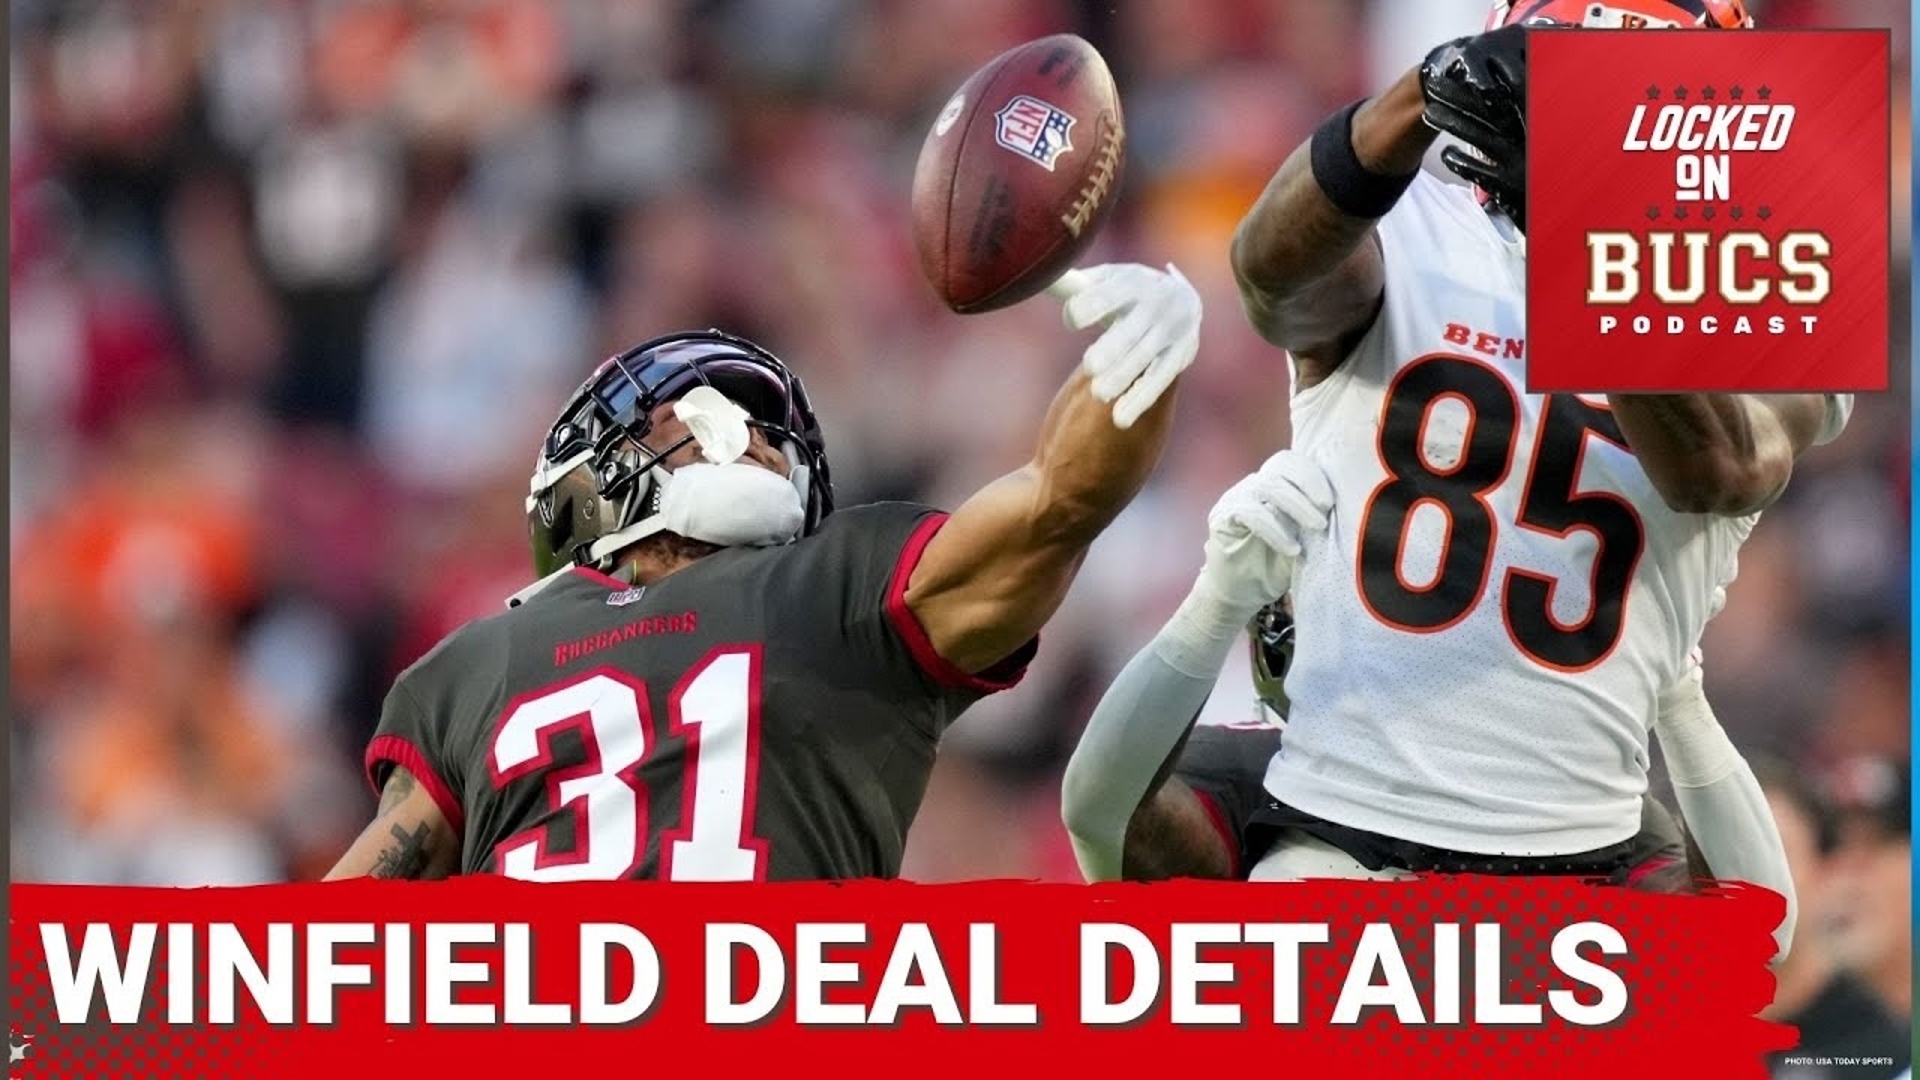 Tampa Bay Buccaneers safety Antoine Winfield Jr got his mega-deal, but now we have some details on the structure of how it's laid out